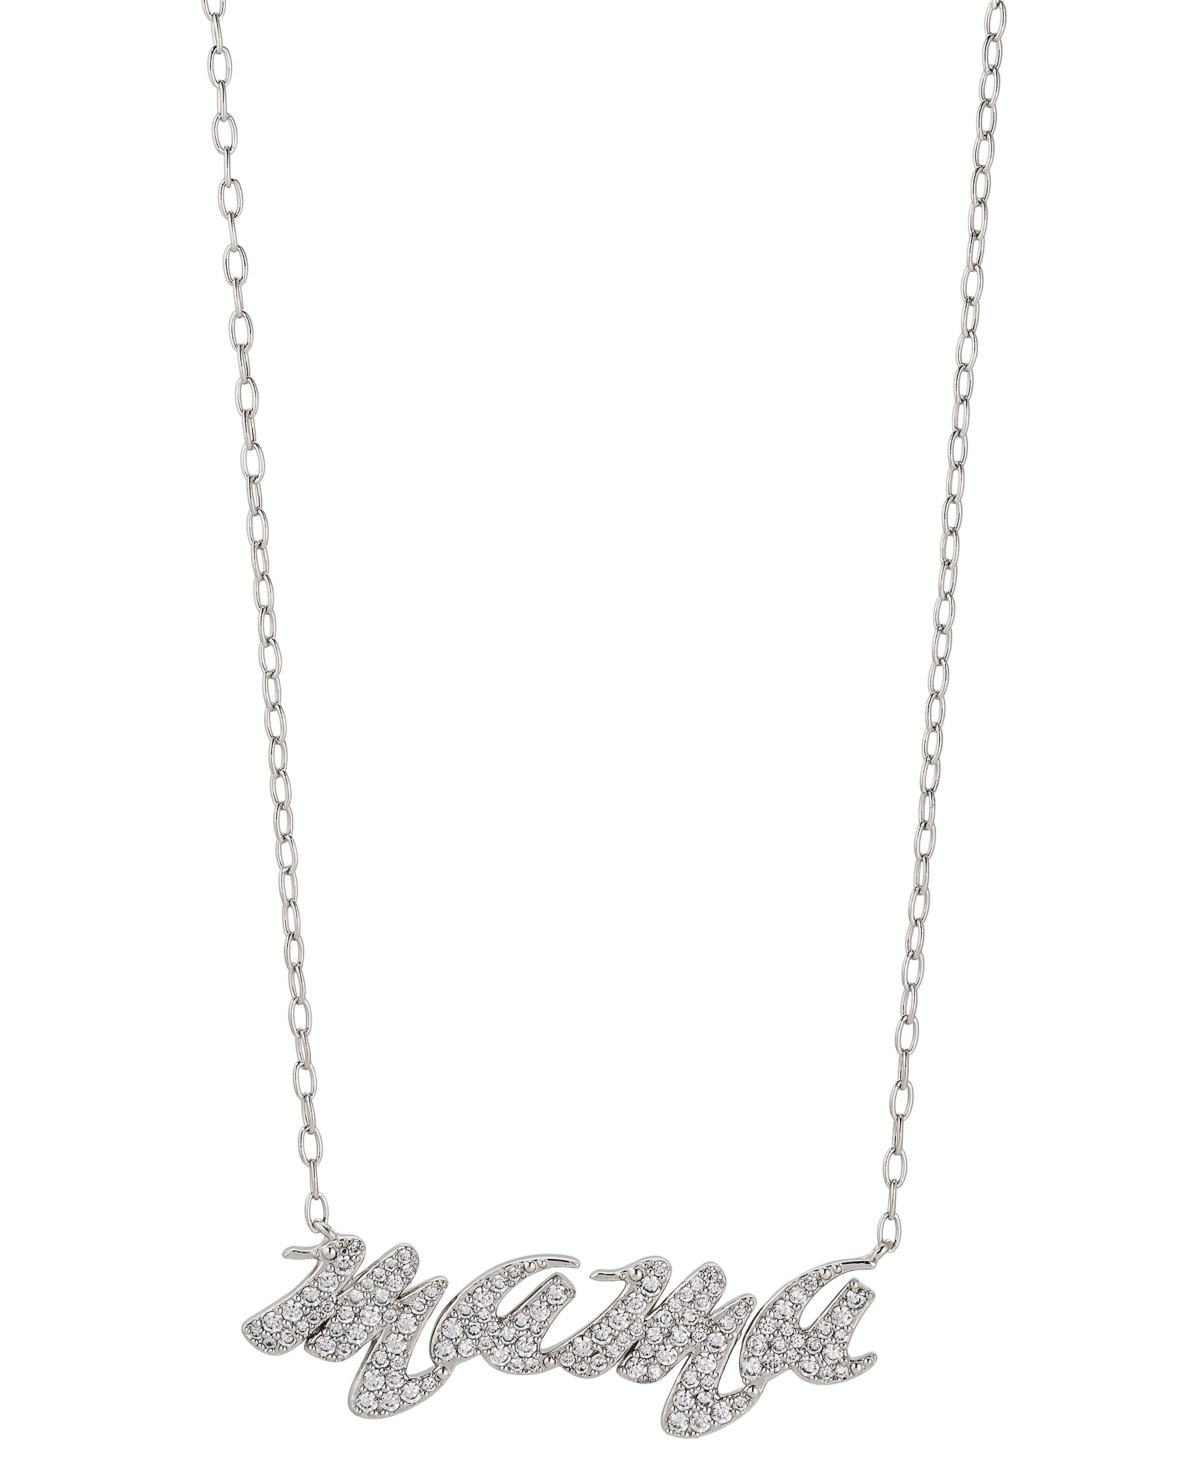 Rhodium-Plated Pave Mama Pendant Necklace, 16" + 2" extender, Created for Macy's - Rhodium